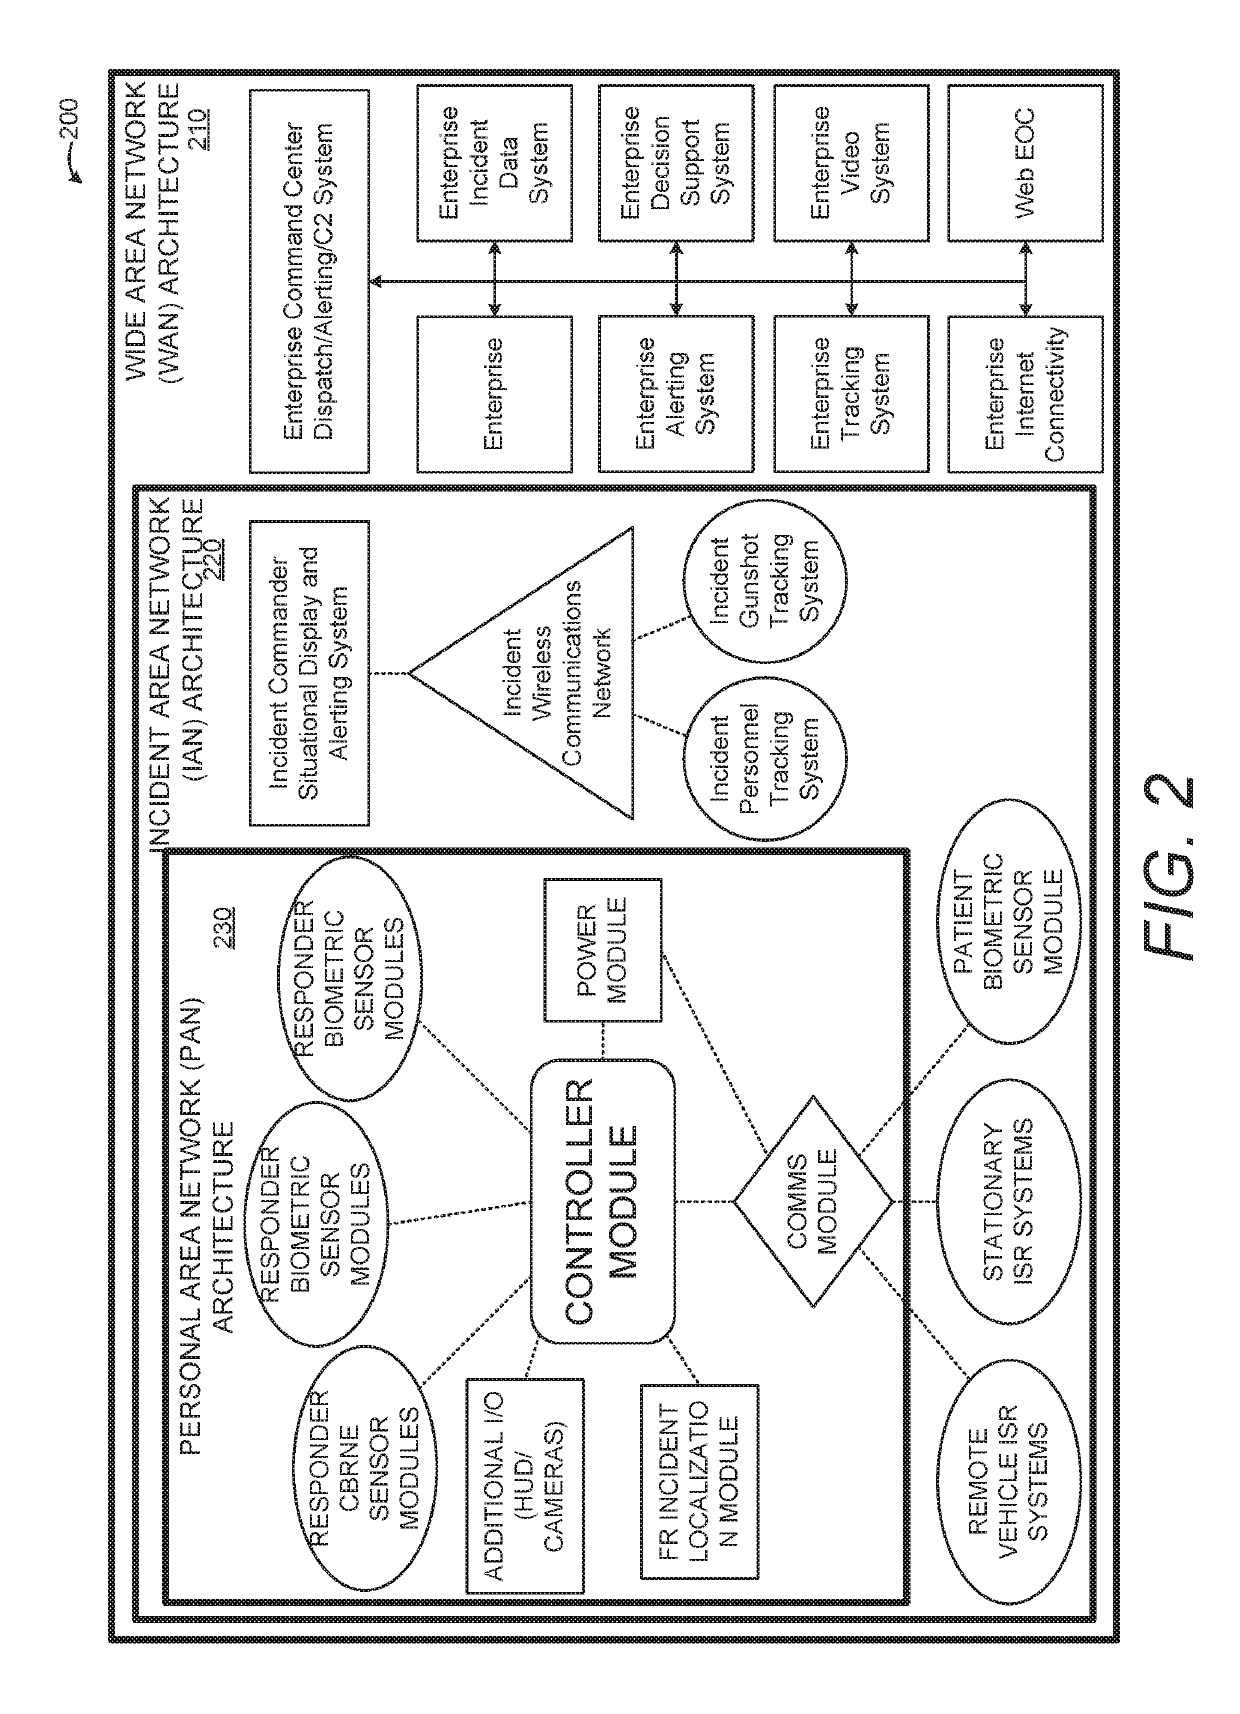 Systems and Methods for Integrating First Responder Technologies